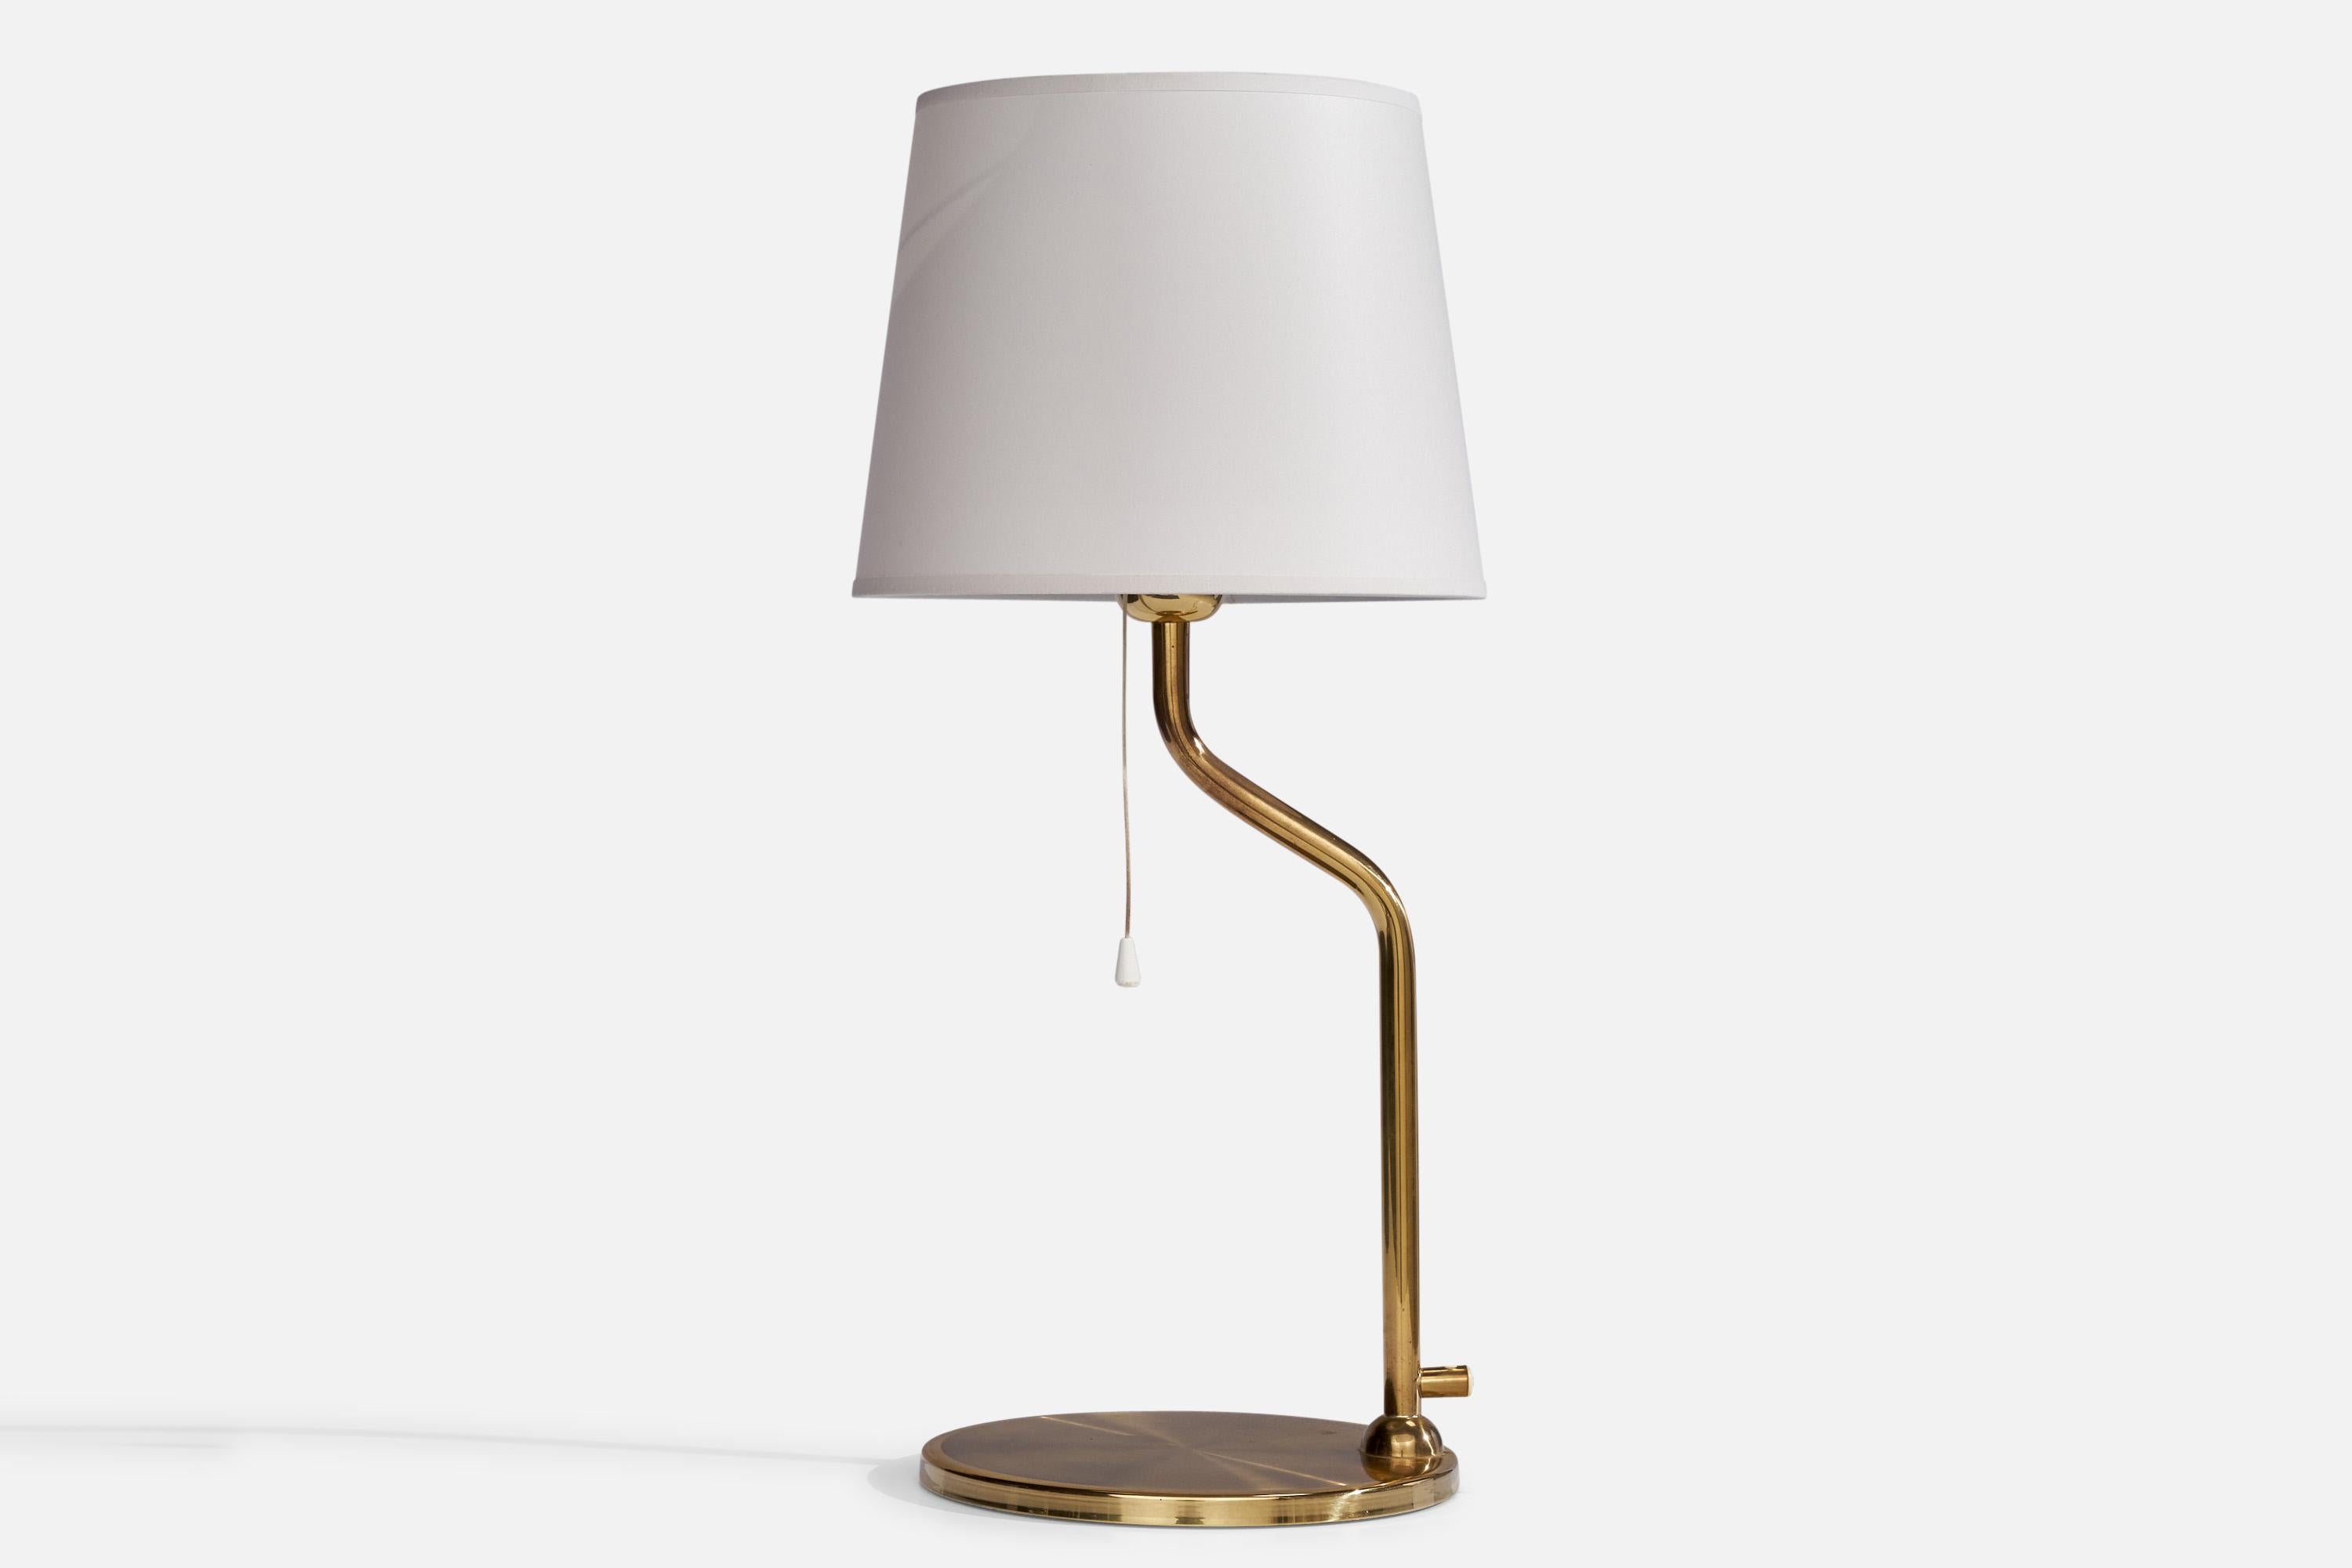 A brass table lamp designed and produced by Nya Öia, Sweden, 1960s.

Dimensions of Lamp (inches): 15.75” H x 8.75” Diameter
Dimensions of Shade (inches): 8” Top Diameter x 10” Bottom Diameter x 8” H
Dimensions of Lamp with Shade (inches): 22.2” H x